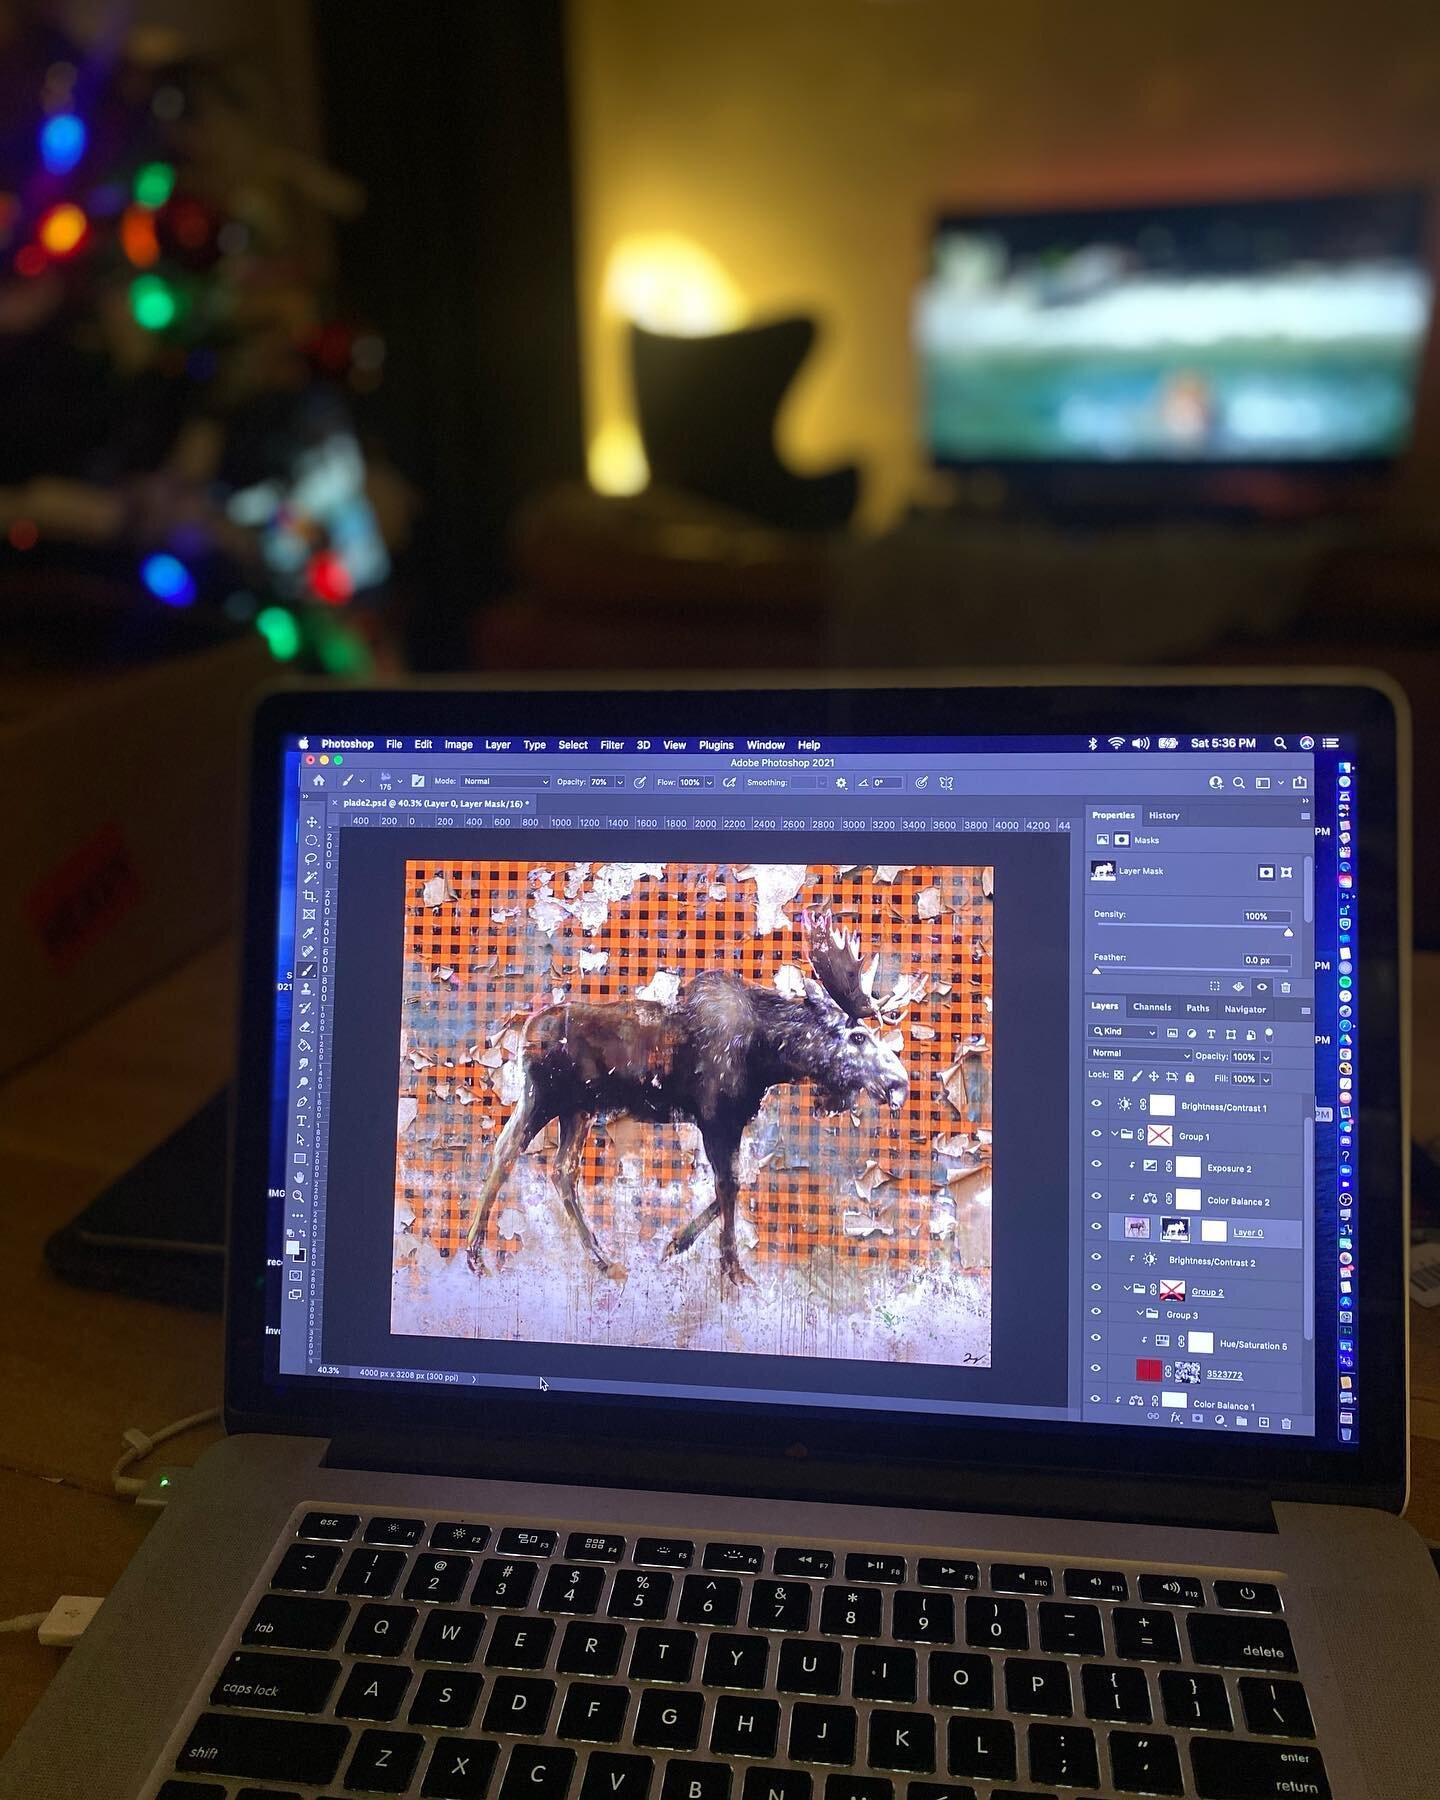 Merry Christmas everyone, just Working on some print ideas for the new year while watching LOTR! 

#print #canada #art #moose